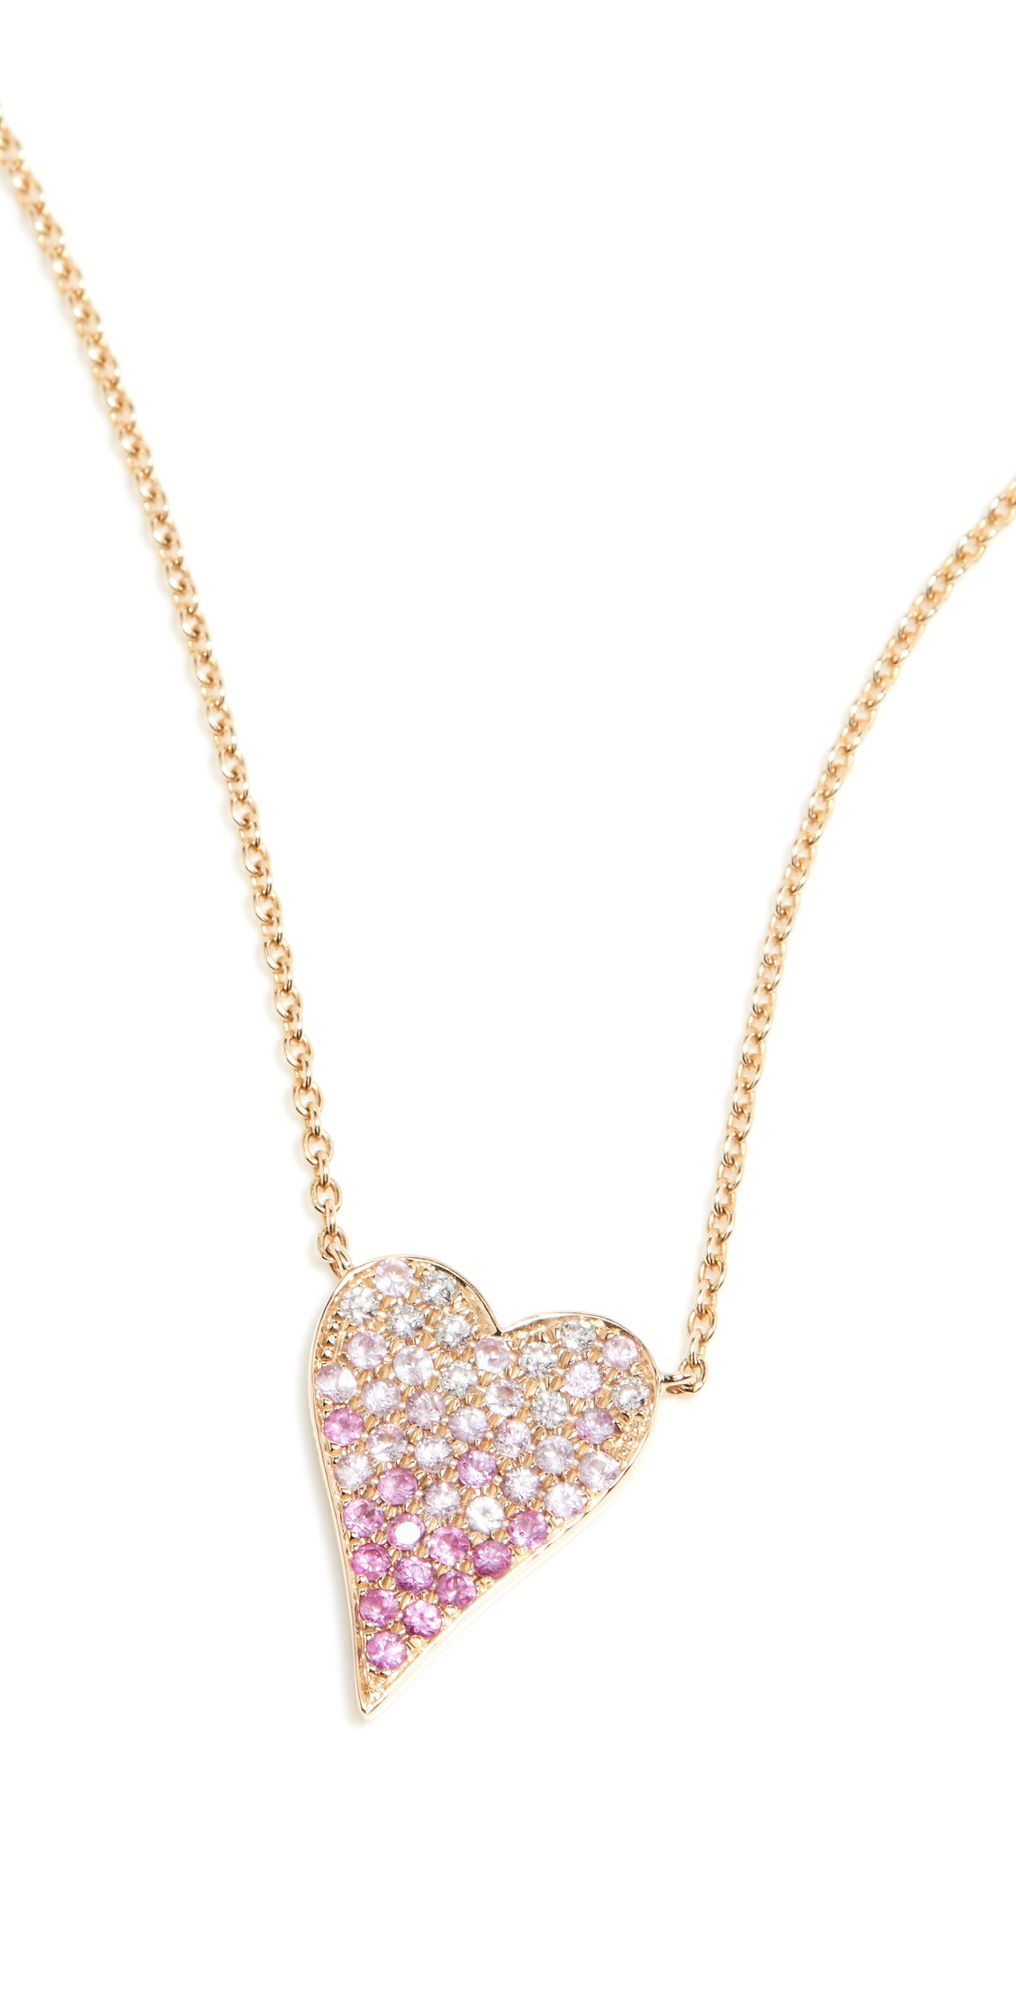 Stephanie Gottlieb 14k Small Pave Ombre Heart Necklace | Shopbop